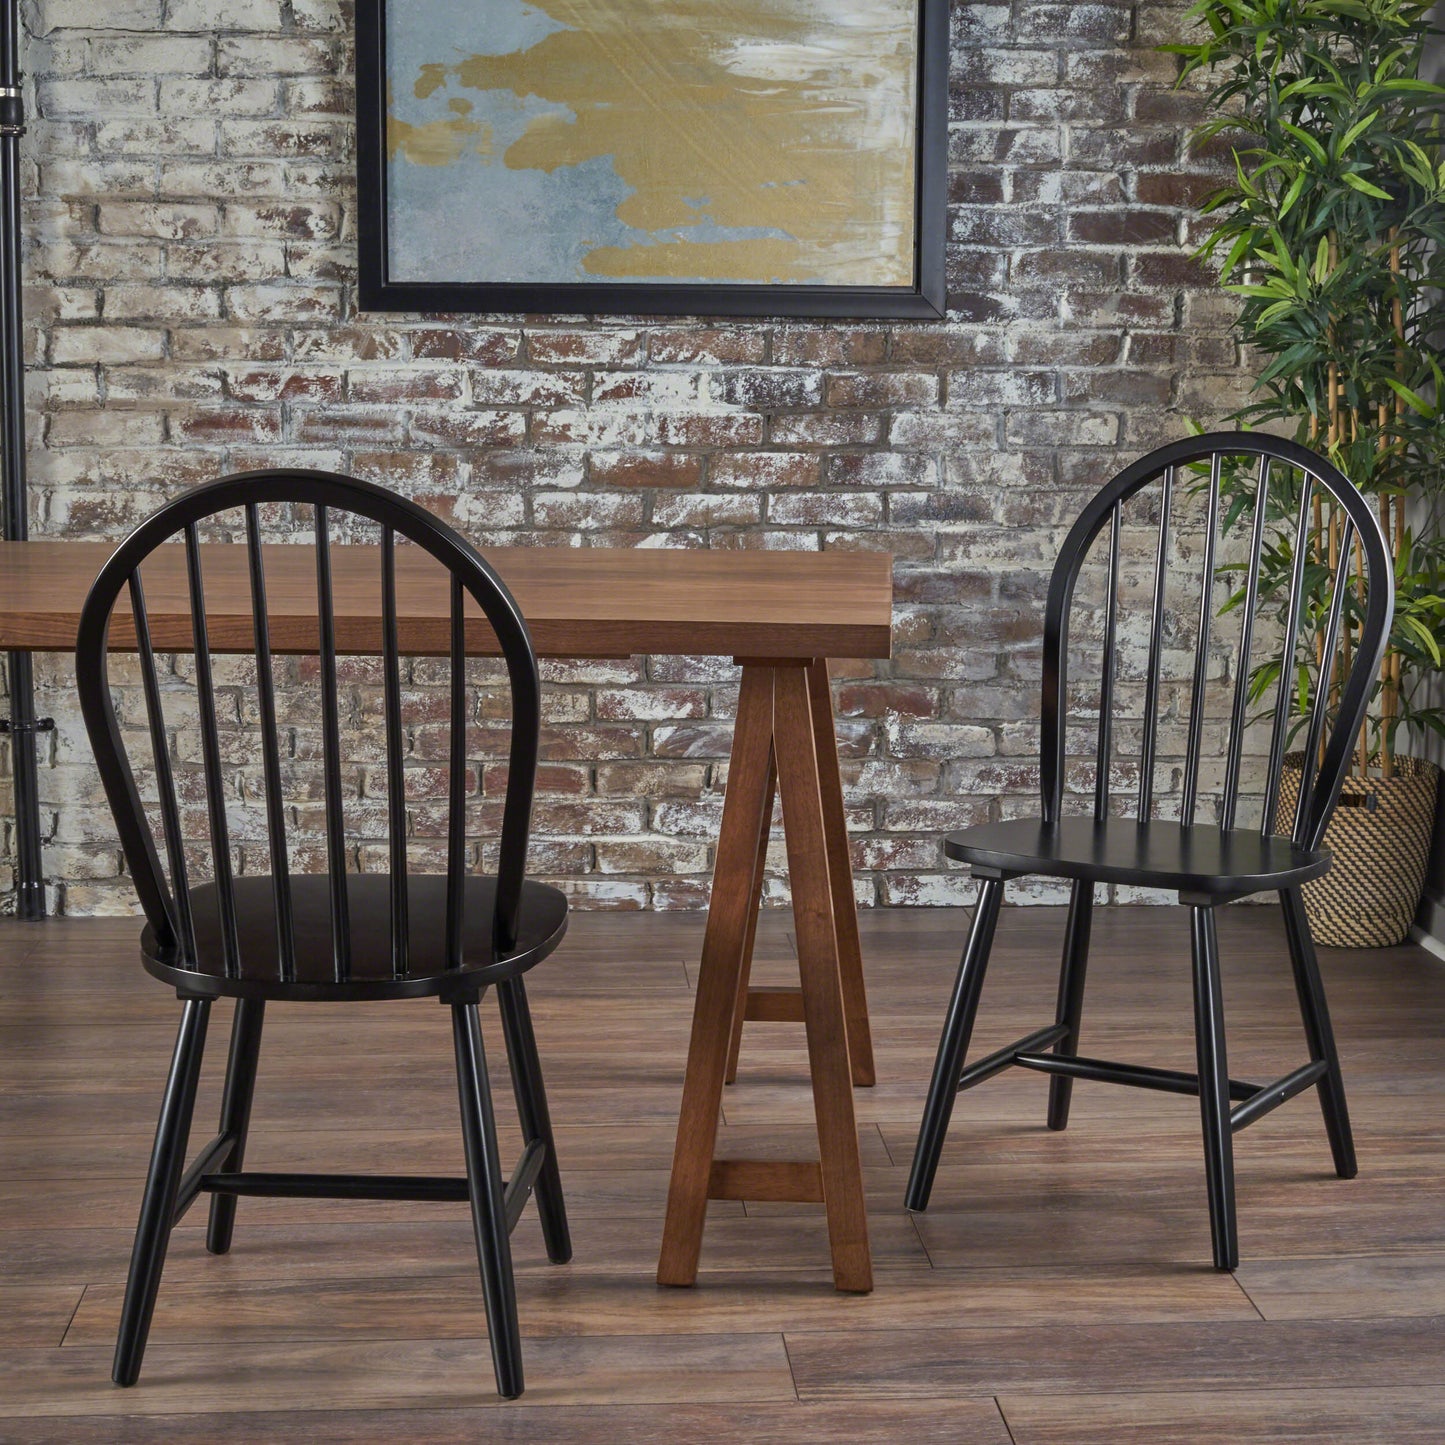 Crosby Farmhouse Cottage High Back Spindled Rubberwood Dining Chairs (Set of 2)